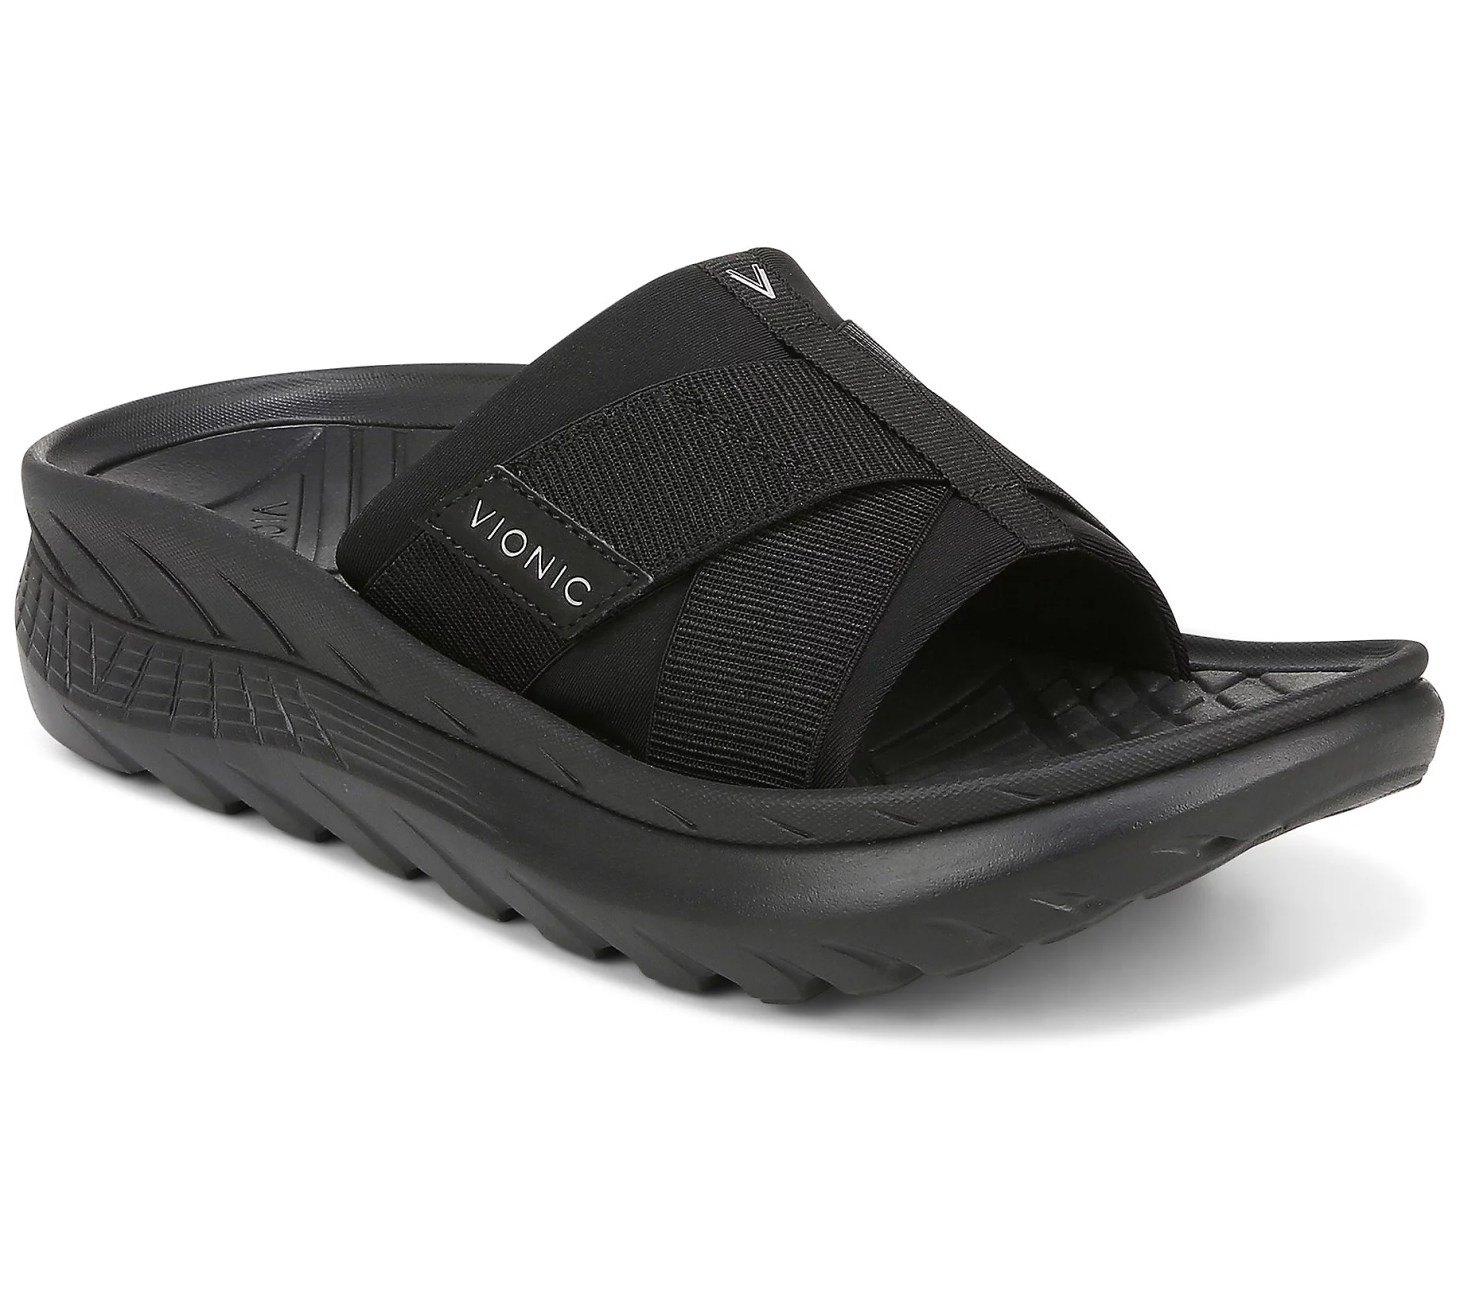 vionic recovery slides, vionic shoes on sale